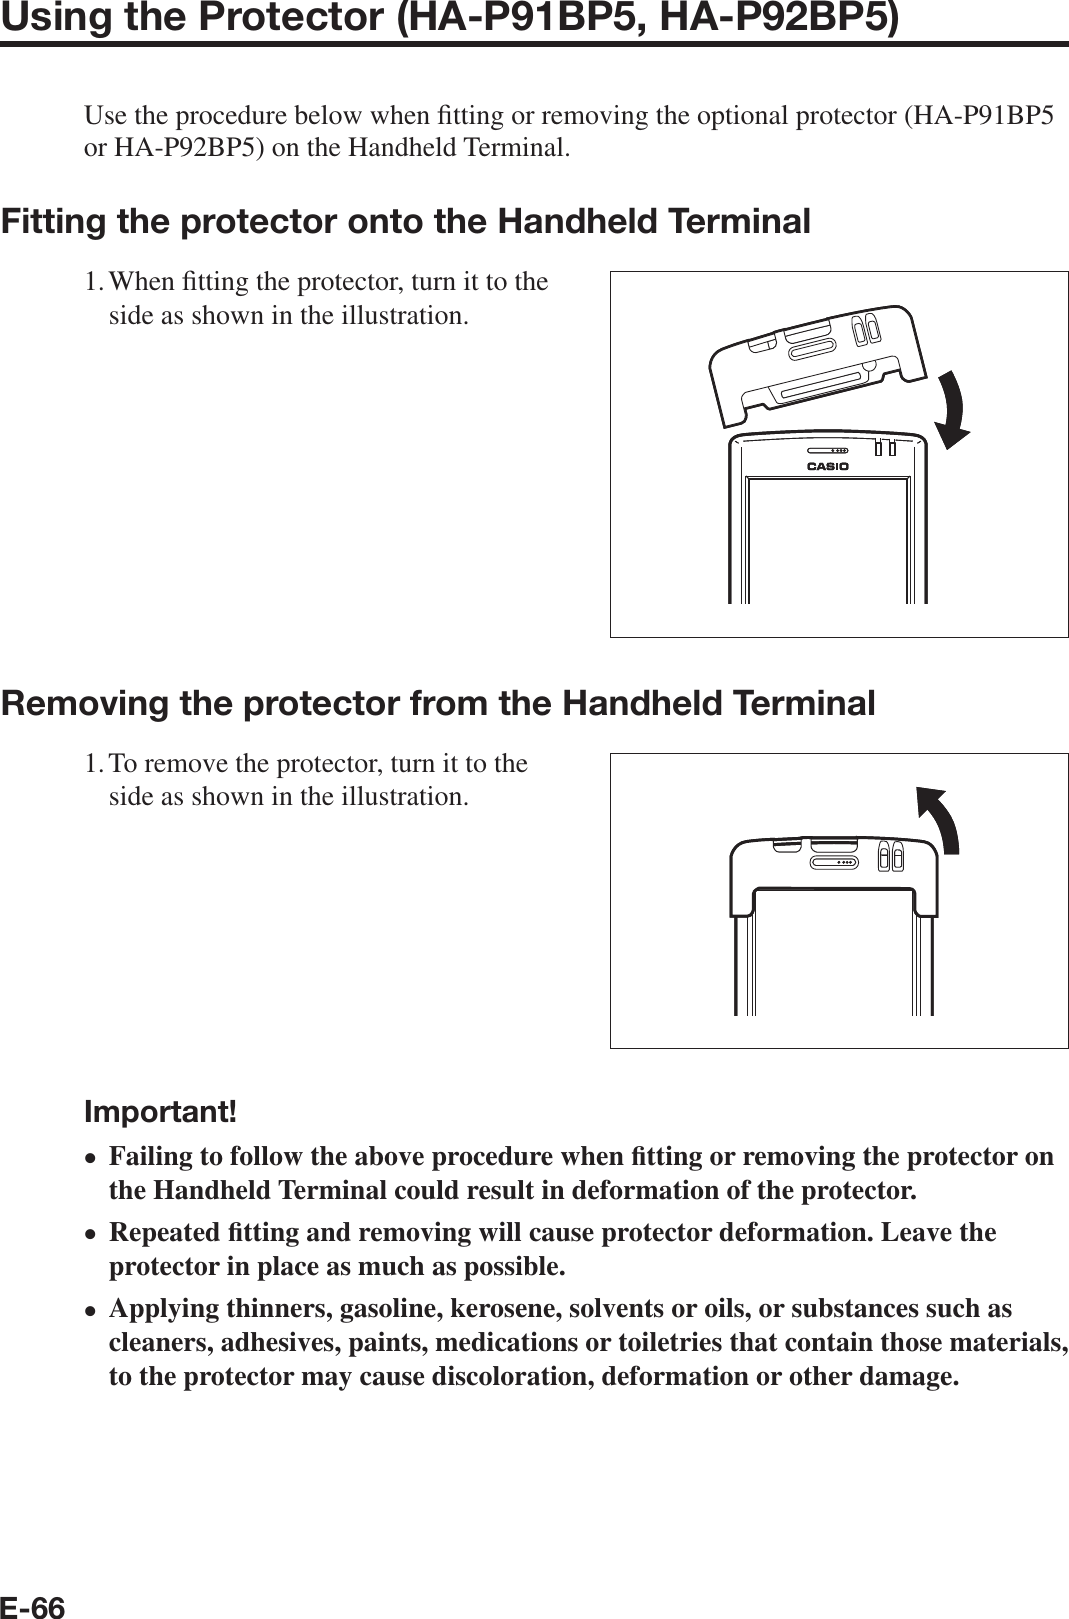 E-66Using the Protector (HA-P91BP5, HA-P92BP5)Use the procedure below when ¿ tting or removing the optional protector (HA-P91BP5 or HA-P92BP5) on the Handheld Terminal.Fitting the protector onto the Handheld Terminal1. When  ¿ tting the protector, turn it to the side as shown in the illustration.Removing the protector from the Handheld Terminal1. To remove the protector, turn it to the side as shown in the illustration.Important!Failing to follow the above procedure when ¿ tting or removing the protector on the Handheld Terminal could result in deformation of the protector.Repeated ¿ tting and removing will cause protector deformation. Leave the protector in place as much as possible.Applying thinners, gasoline, kerosene, solvents or oils, or substances such as cleaners, adhesives, paints, medications or toiletries that contain those materials, to the protector may cause discoloration, deformation or other damage.•••